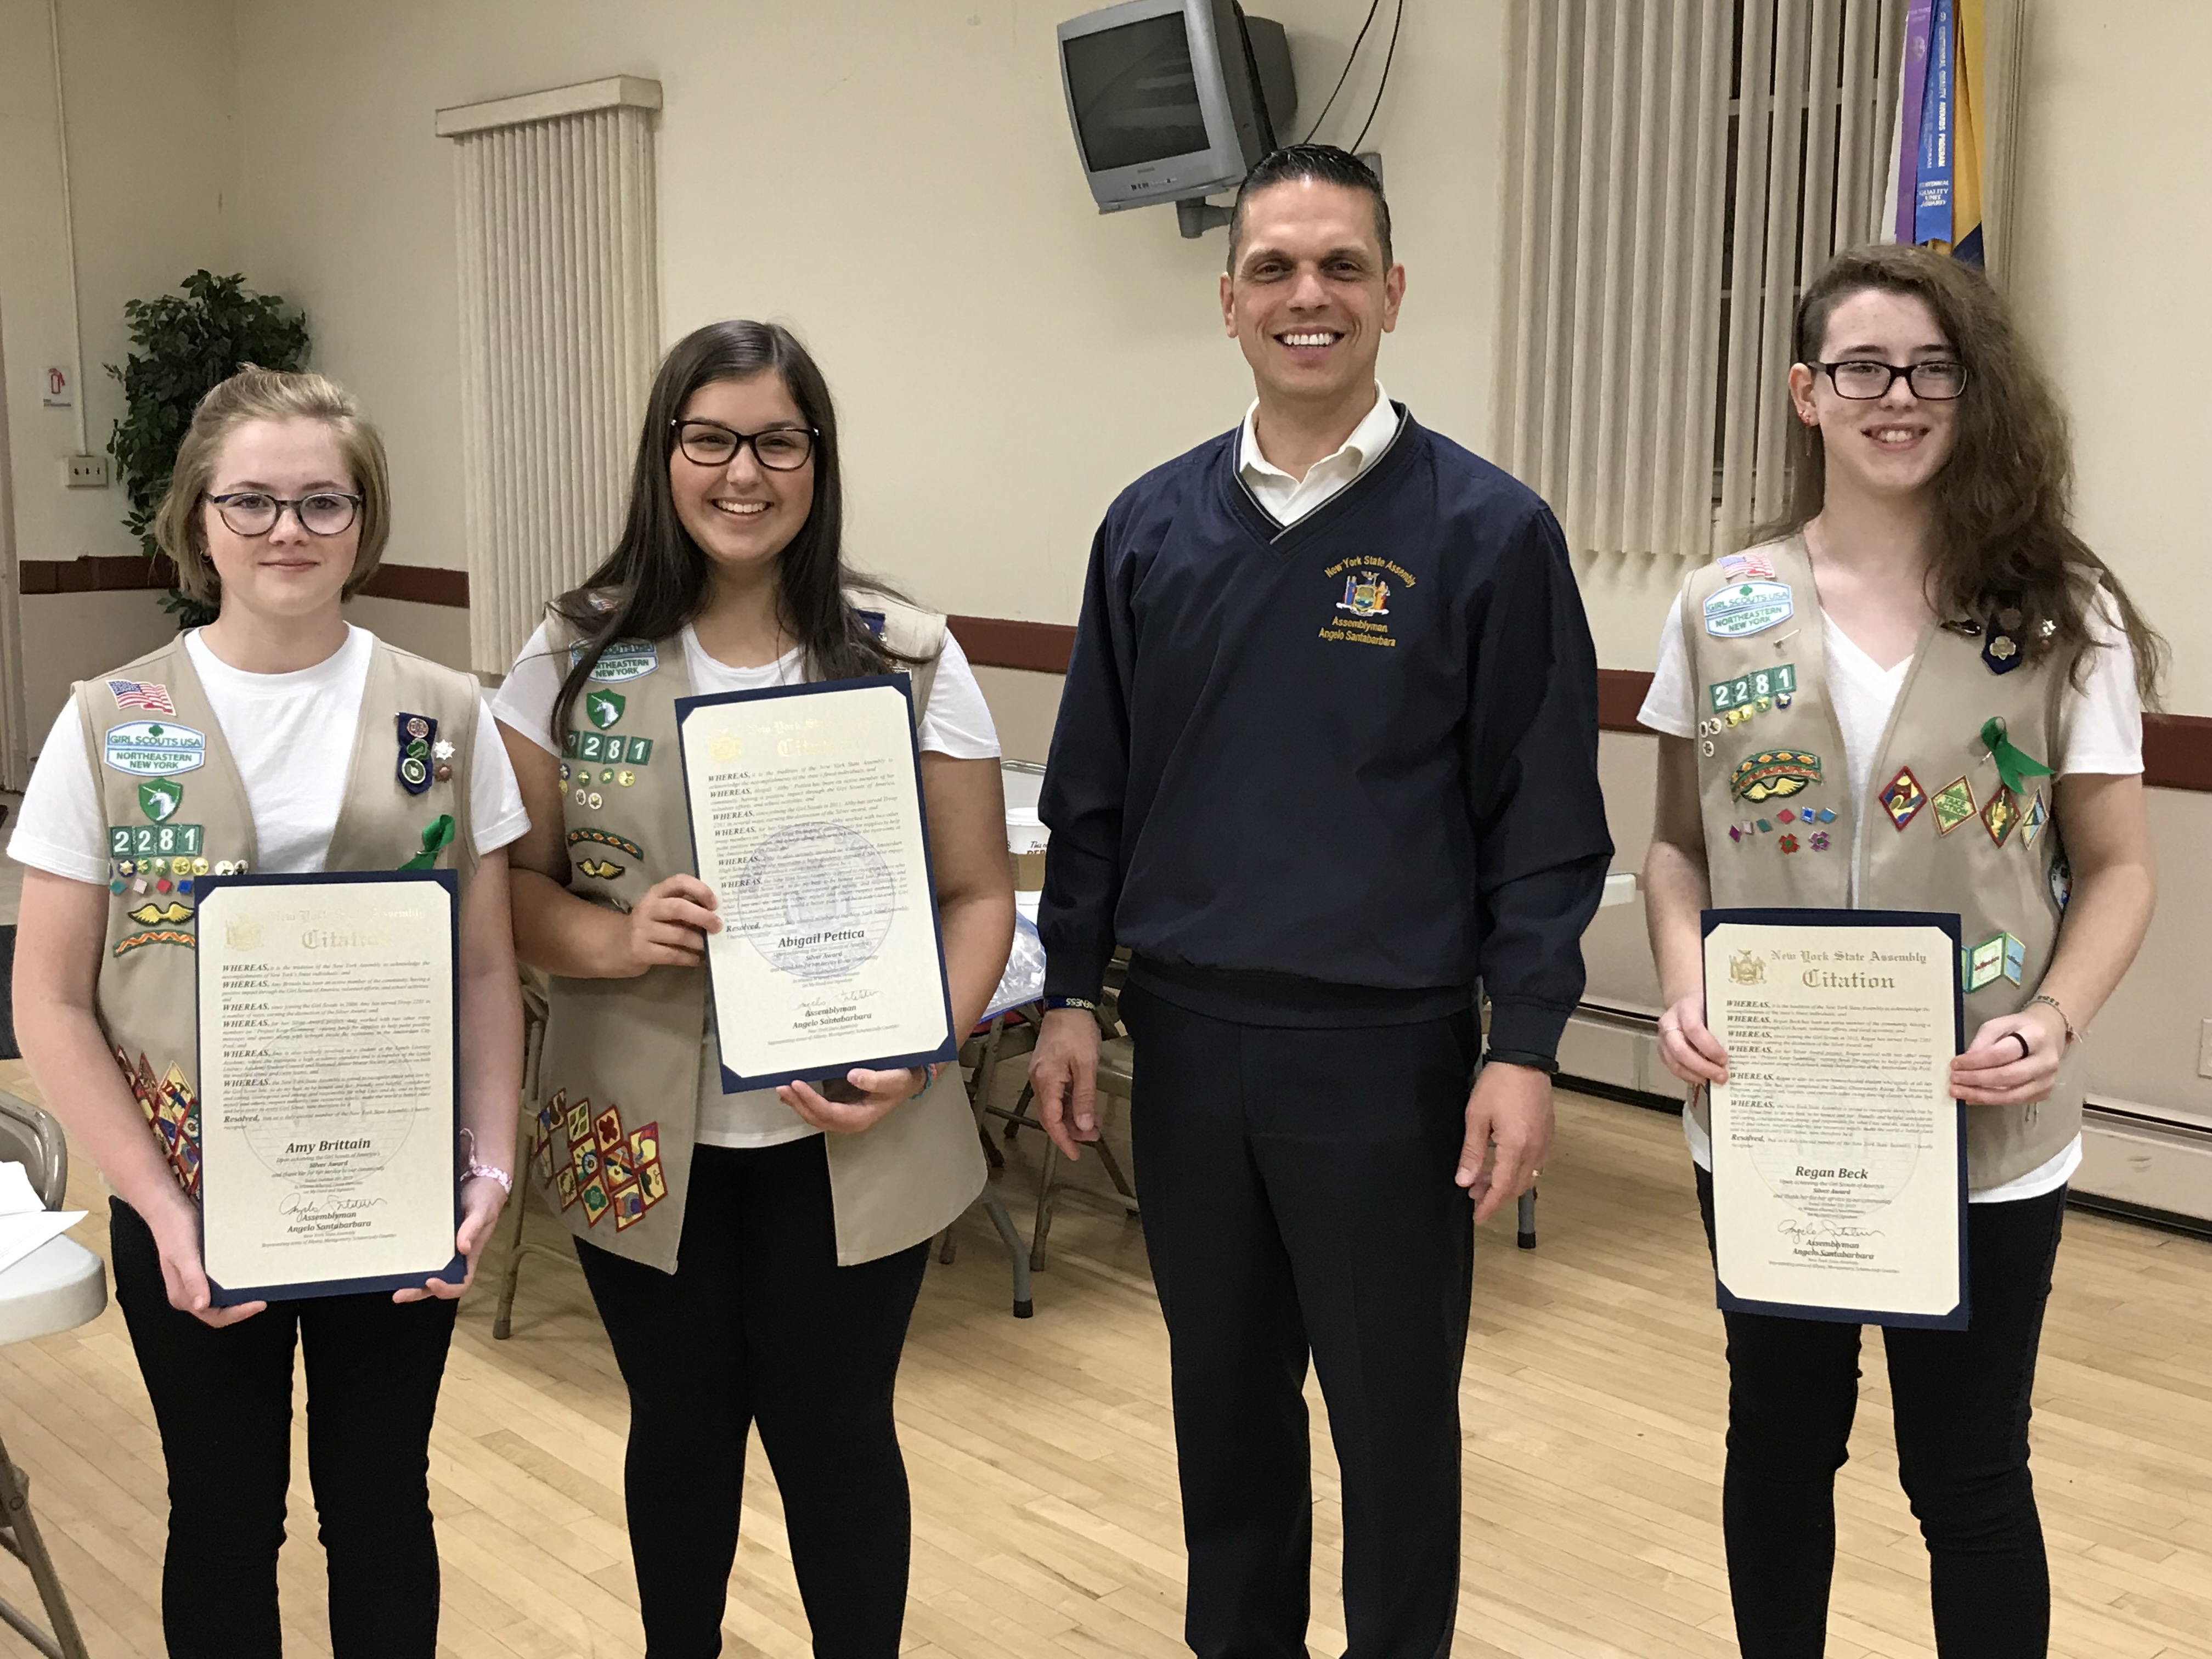 Assemblyman Angelo Santabarbara presents Amy Brittain, Abigail Pettica, and Regan Beck from Girl Scout Troop 2281 in Amsterdam with citations from the New York State Assembly recognizing their Silver